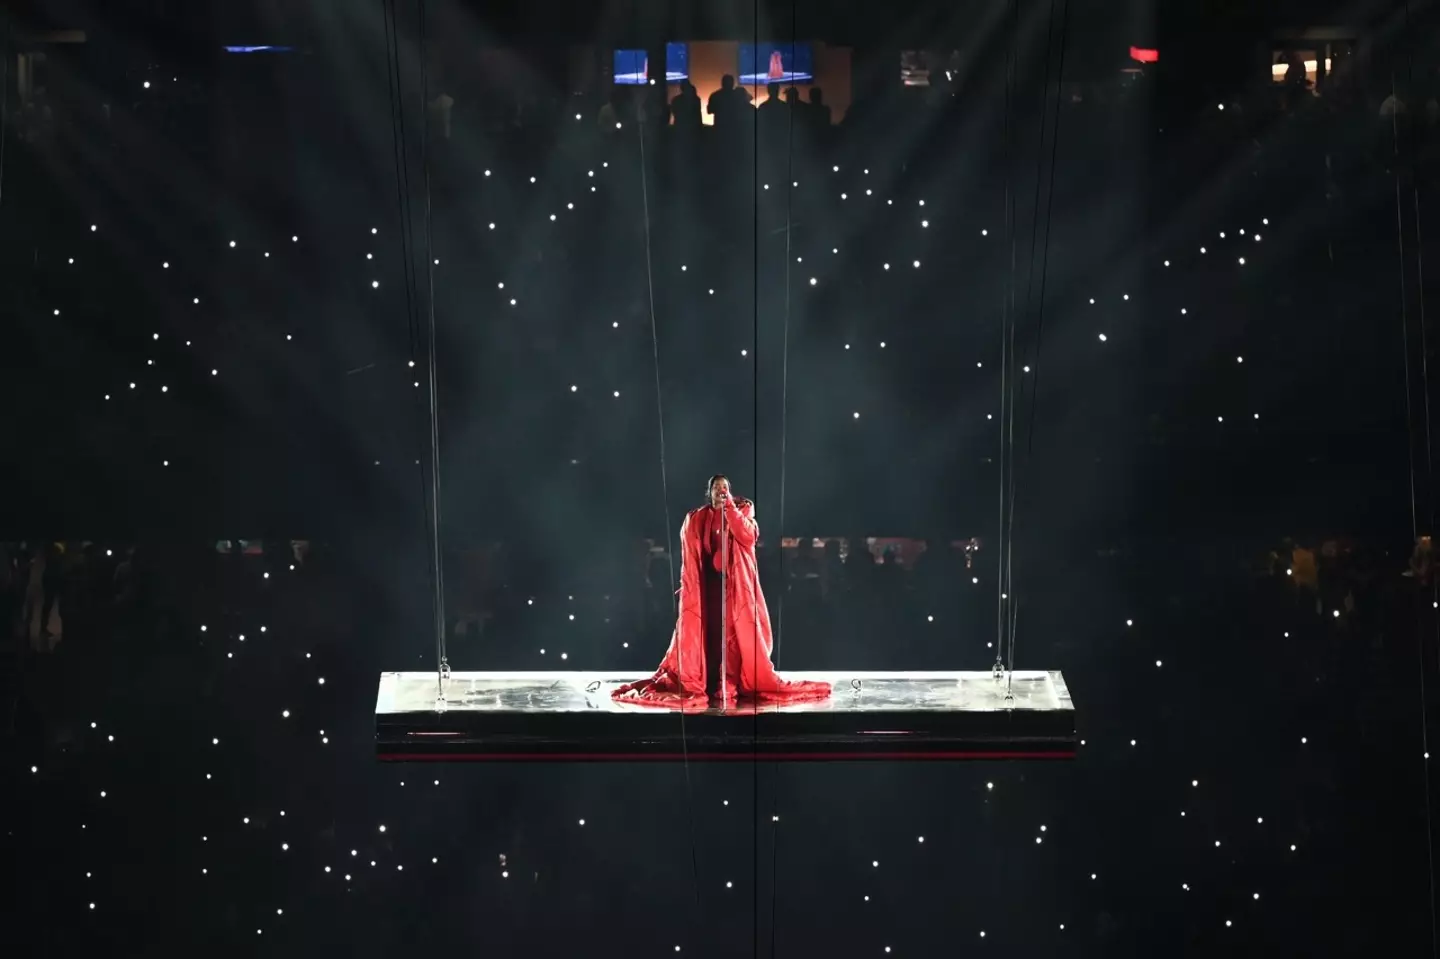 The singer kicked off her live performance suspended high above the Arizona stadium on Sunday (12 February).